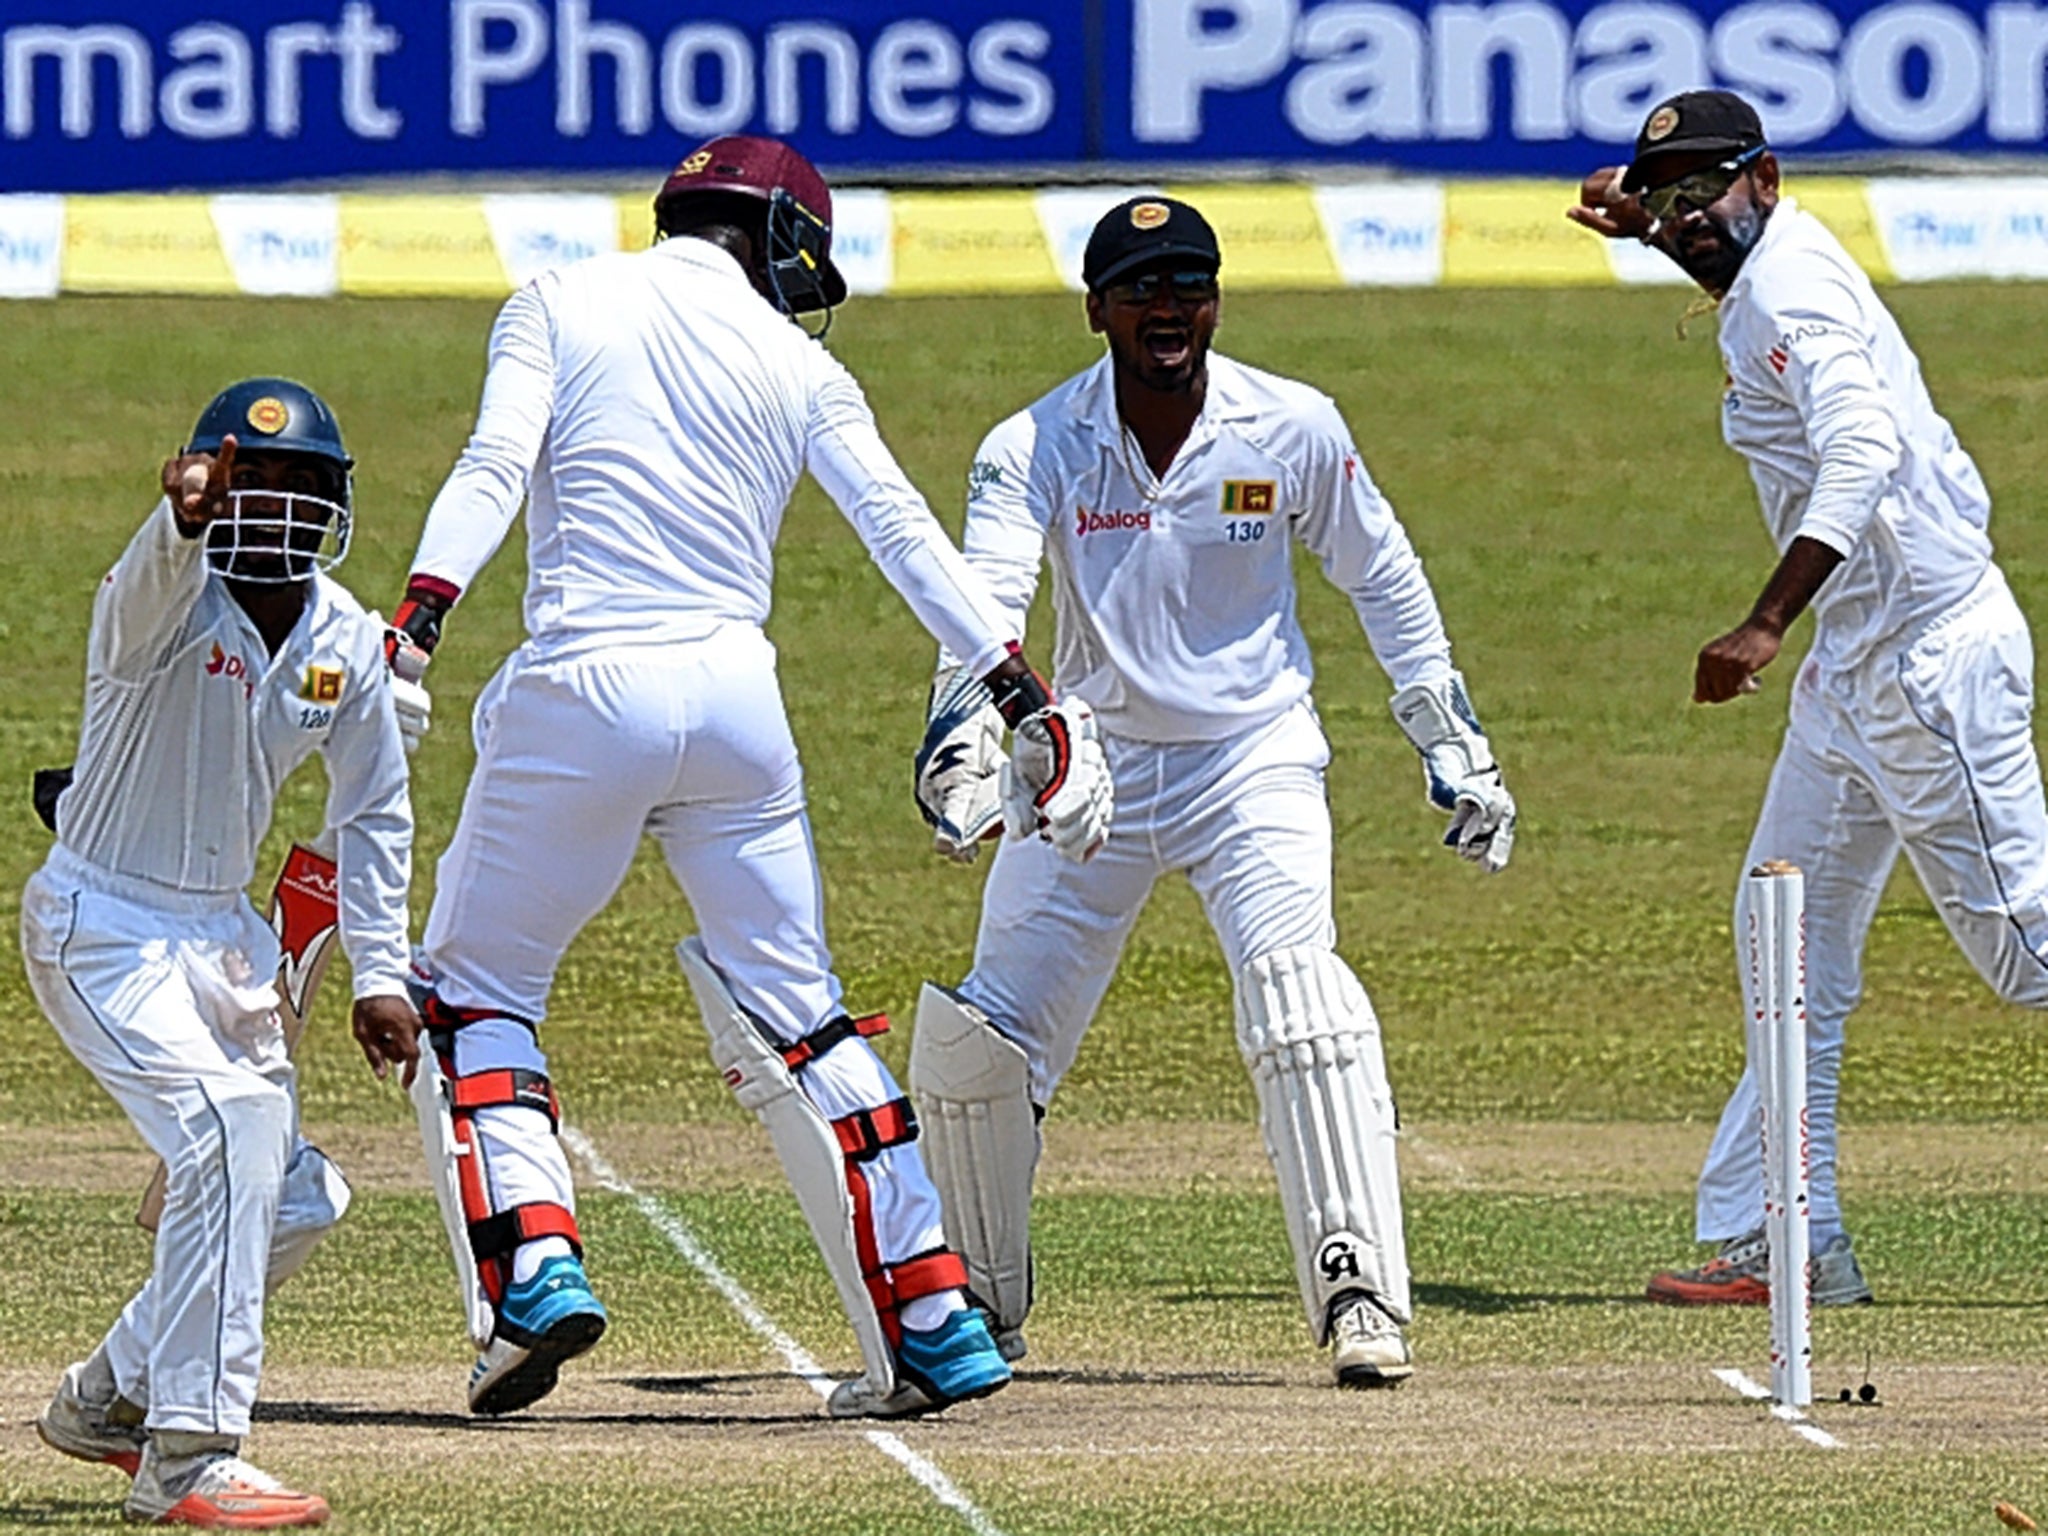 Sri Lanka appeal successfully for the wicket of Kemar Roach as they complete an innings victory over West Indies in Galle